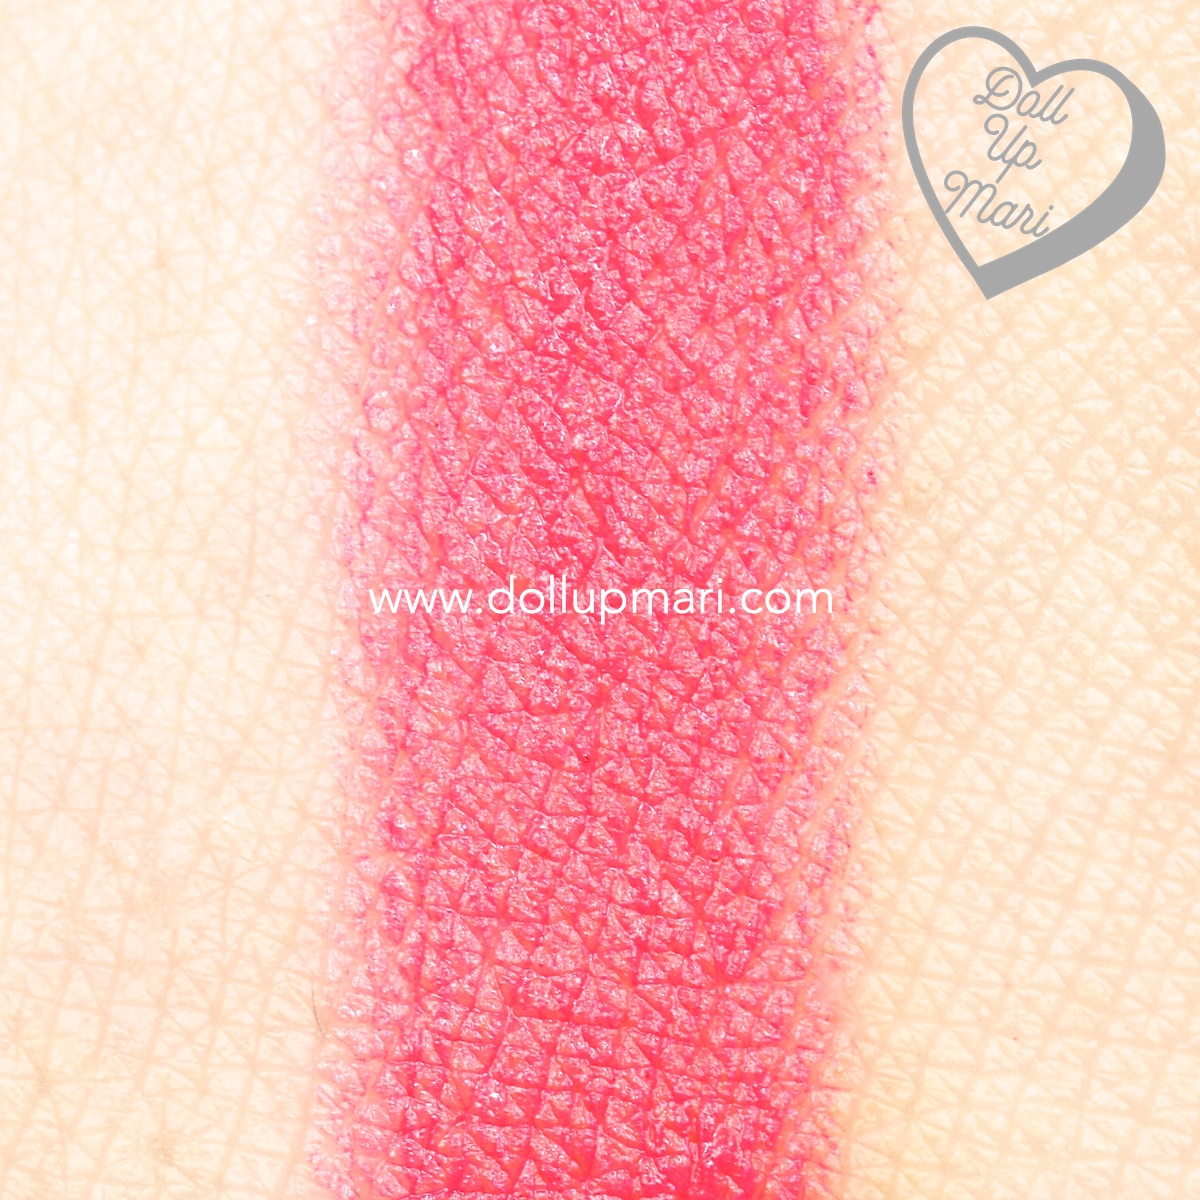 swatch of Vibrant Melon shade of AVON Perfectly Matte Lipstick